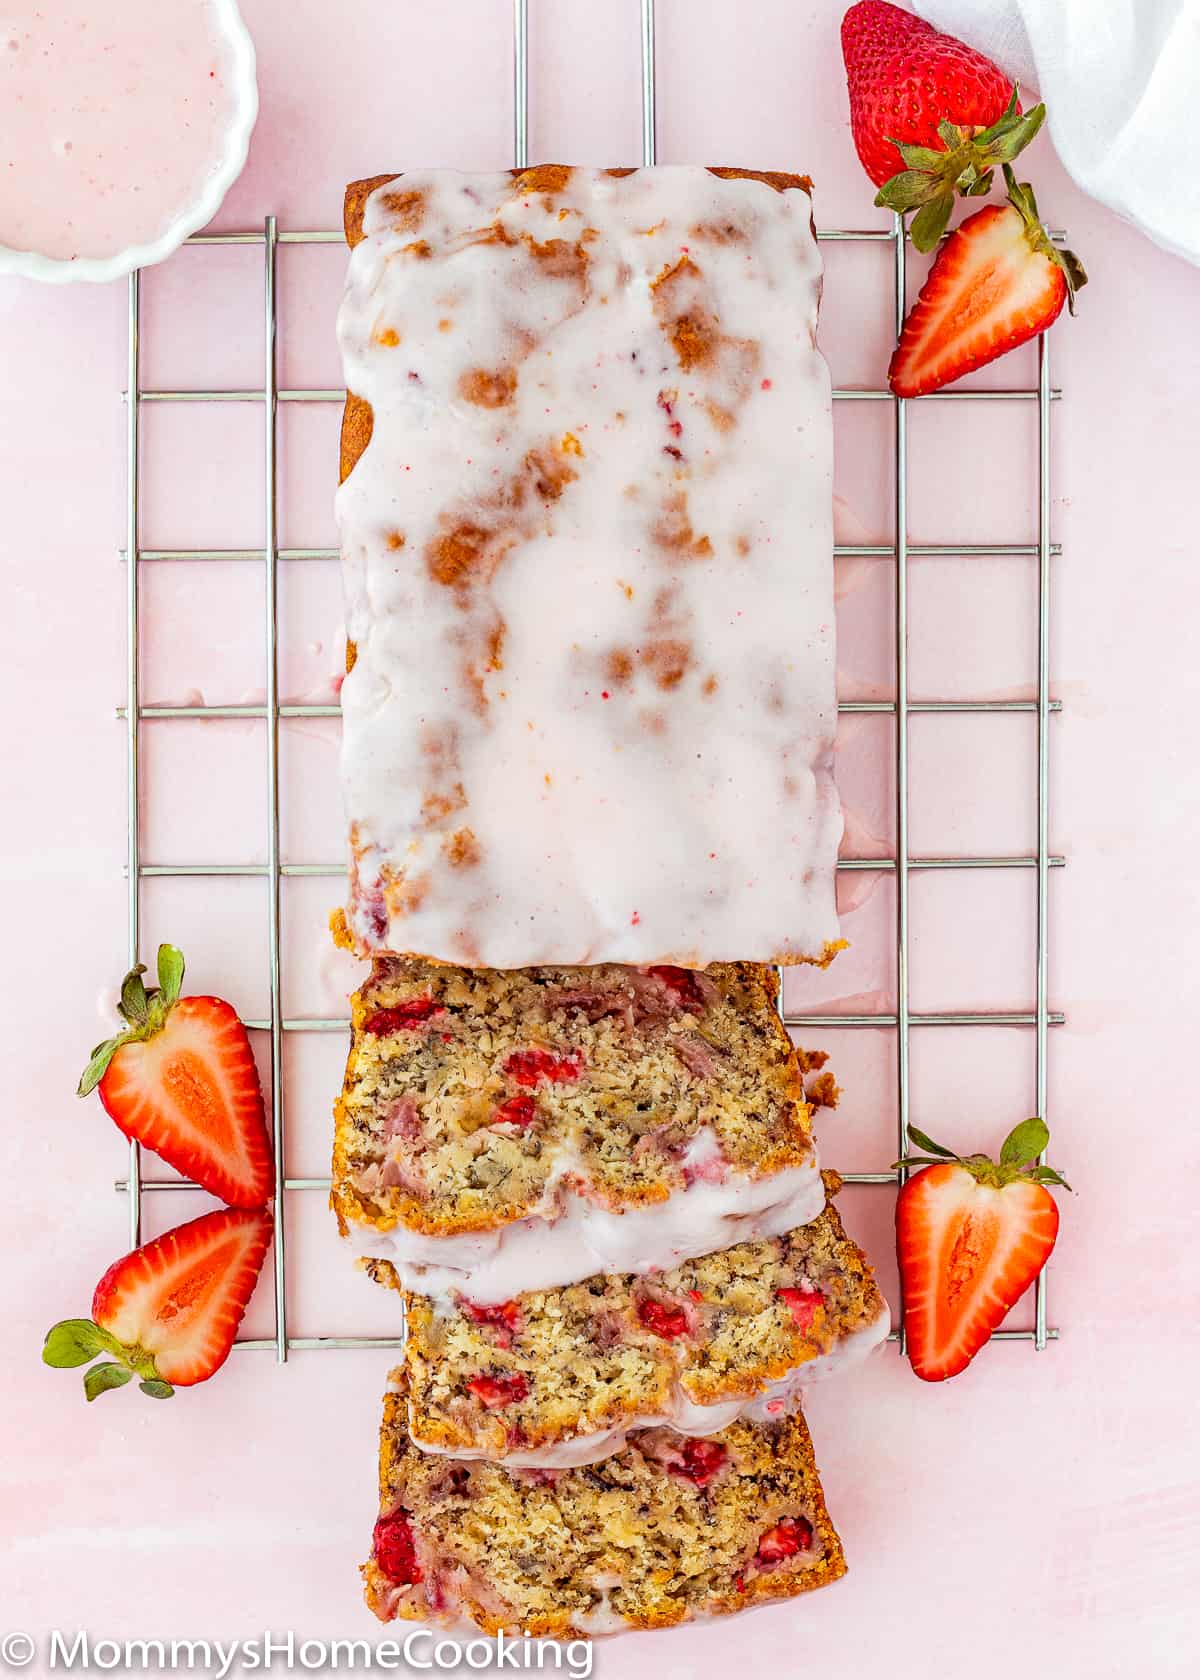 Overhead view of a Eggless Strawberry Banana Bread sliced.